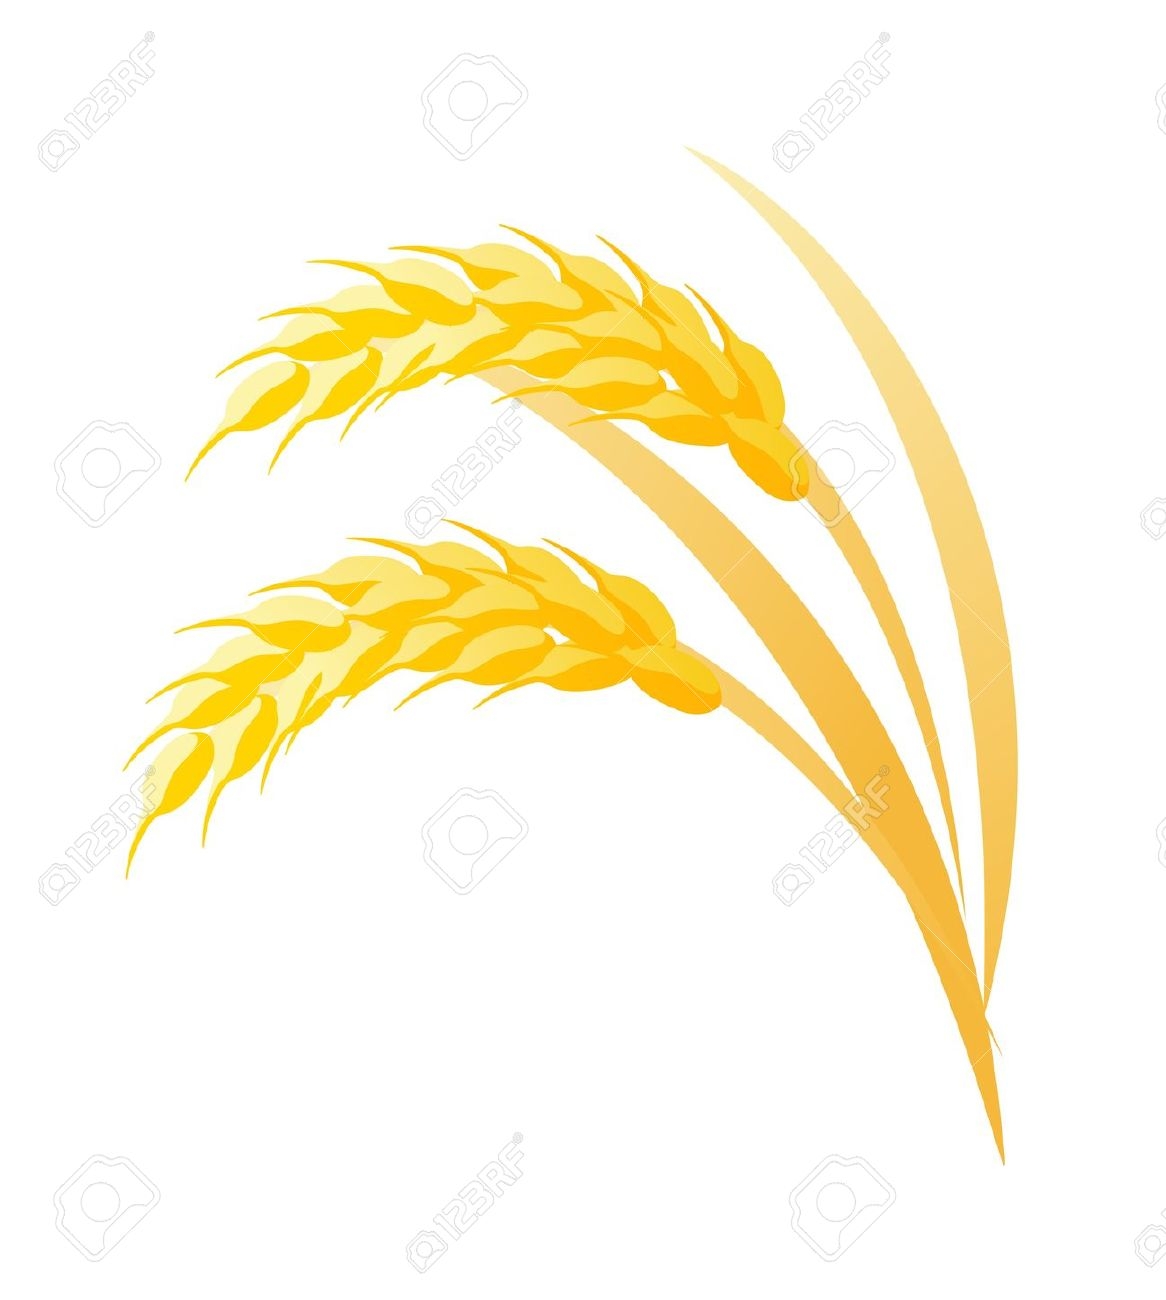 clipart of rice - photo #32